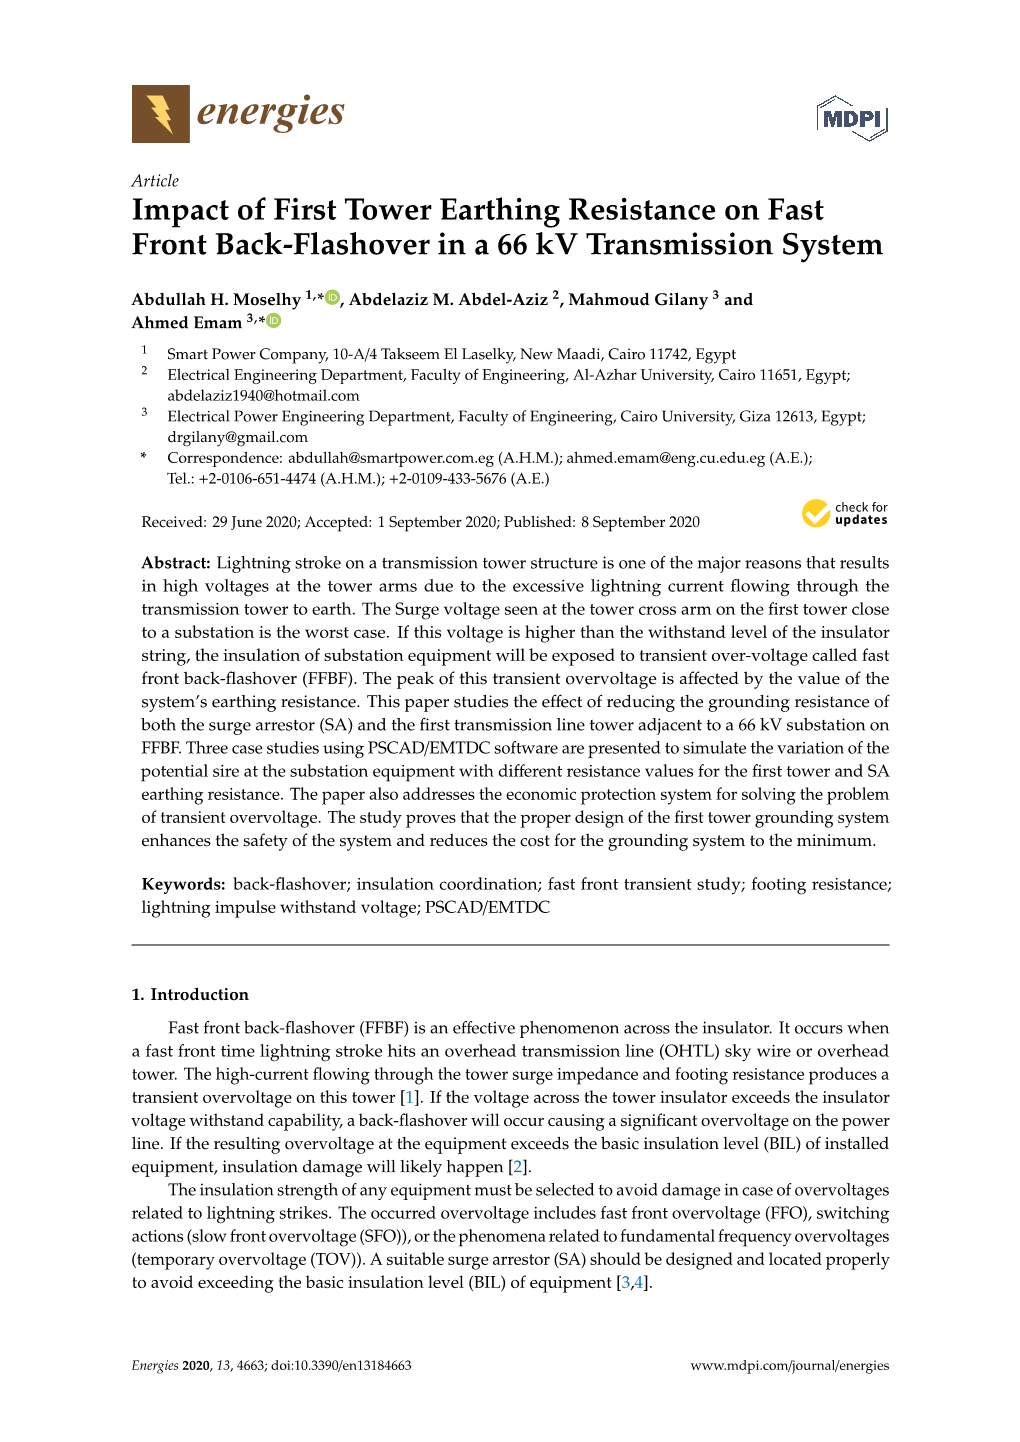 Impact of First Tower Earthing Resistance on Fast Front Back-Flashover in a 66 Kv Transmission System